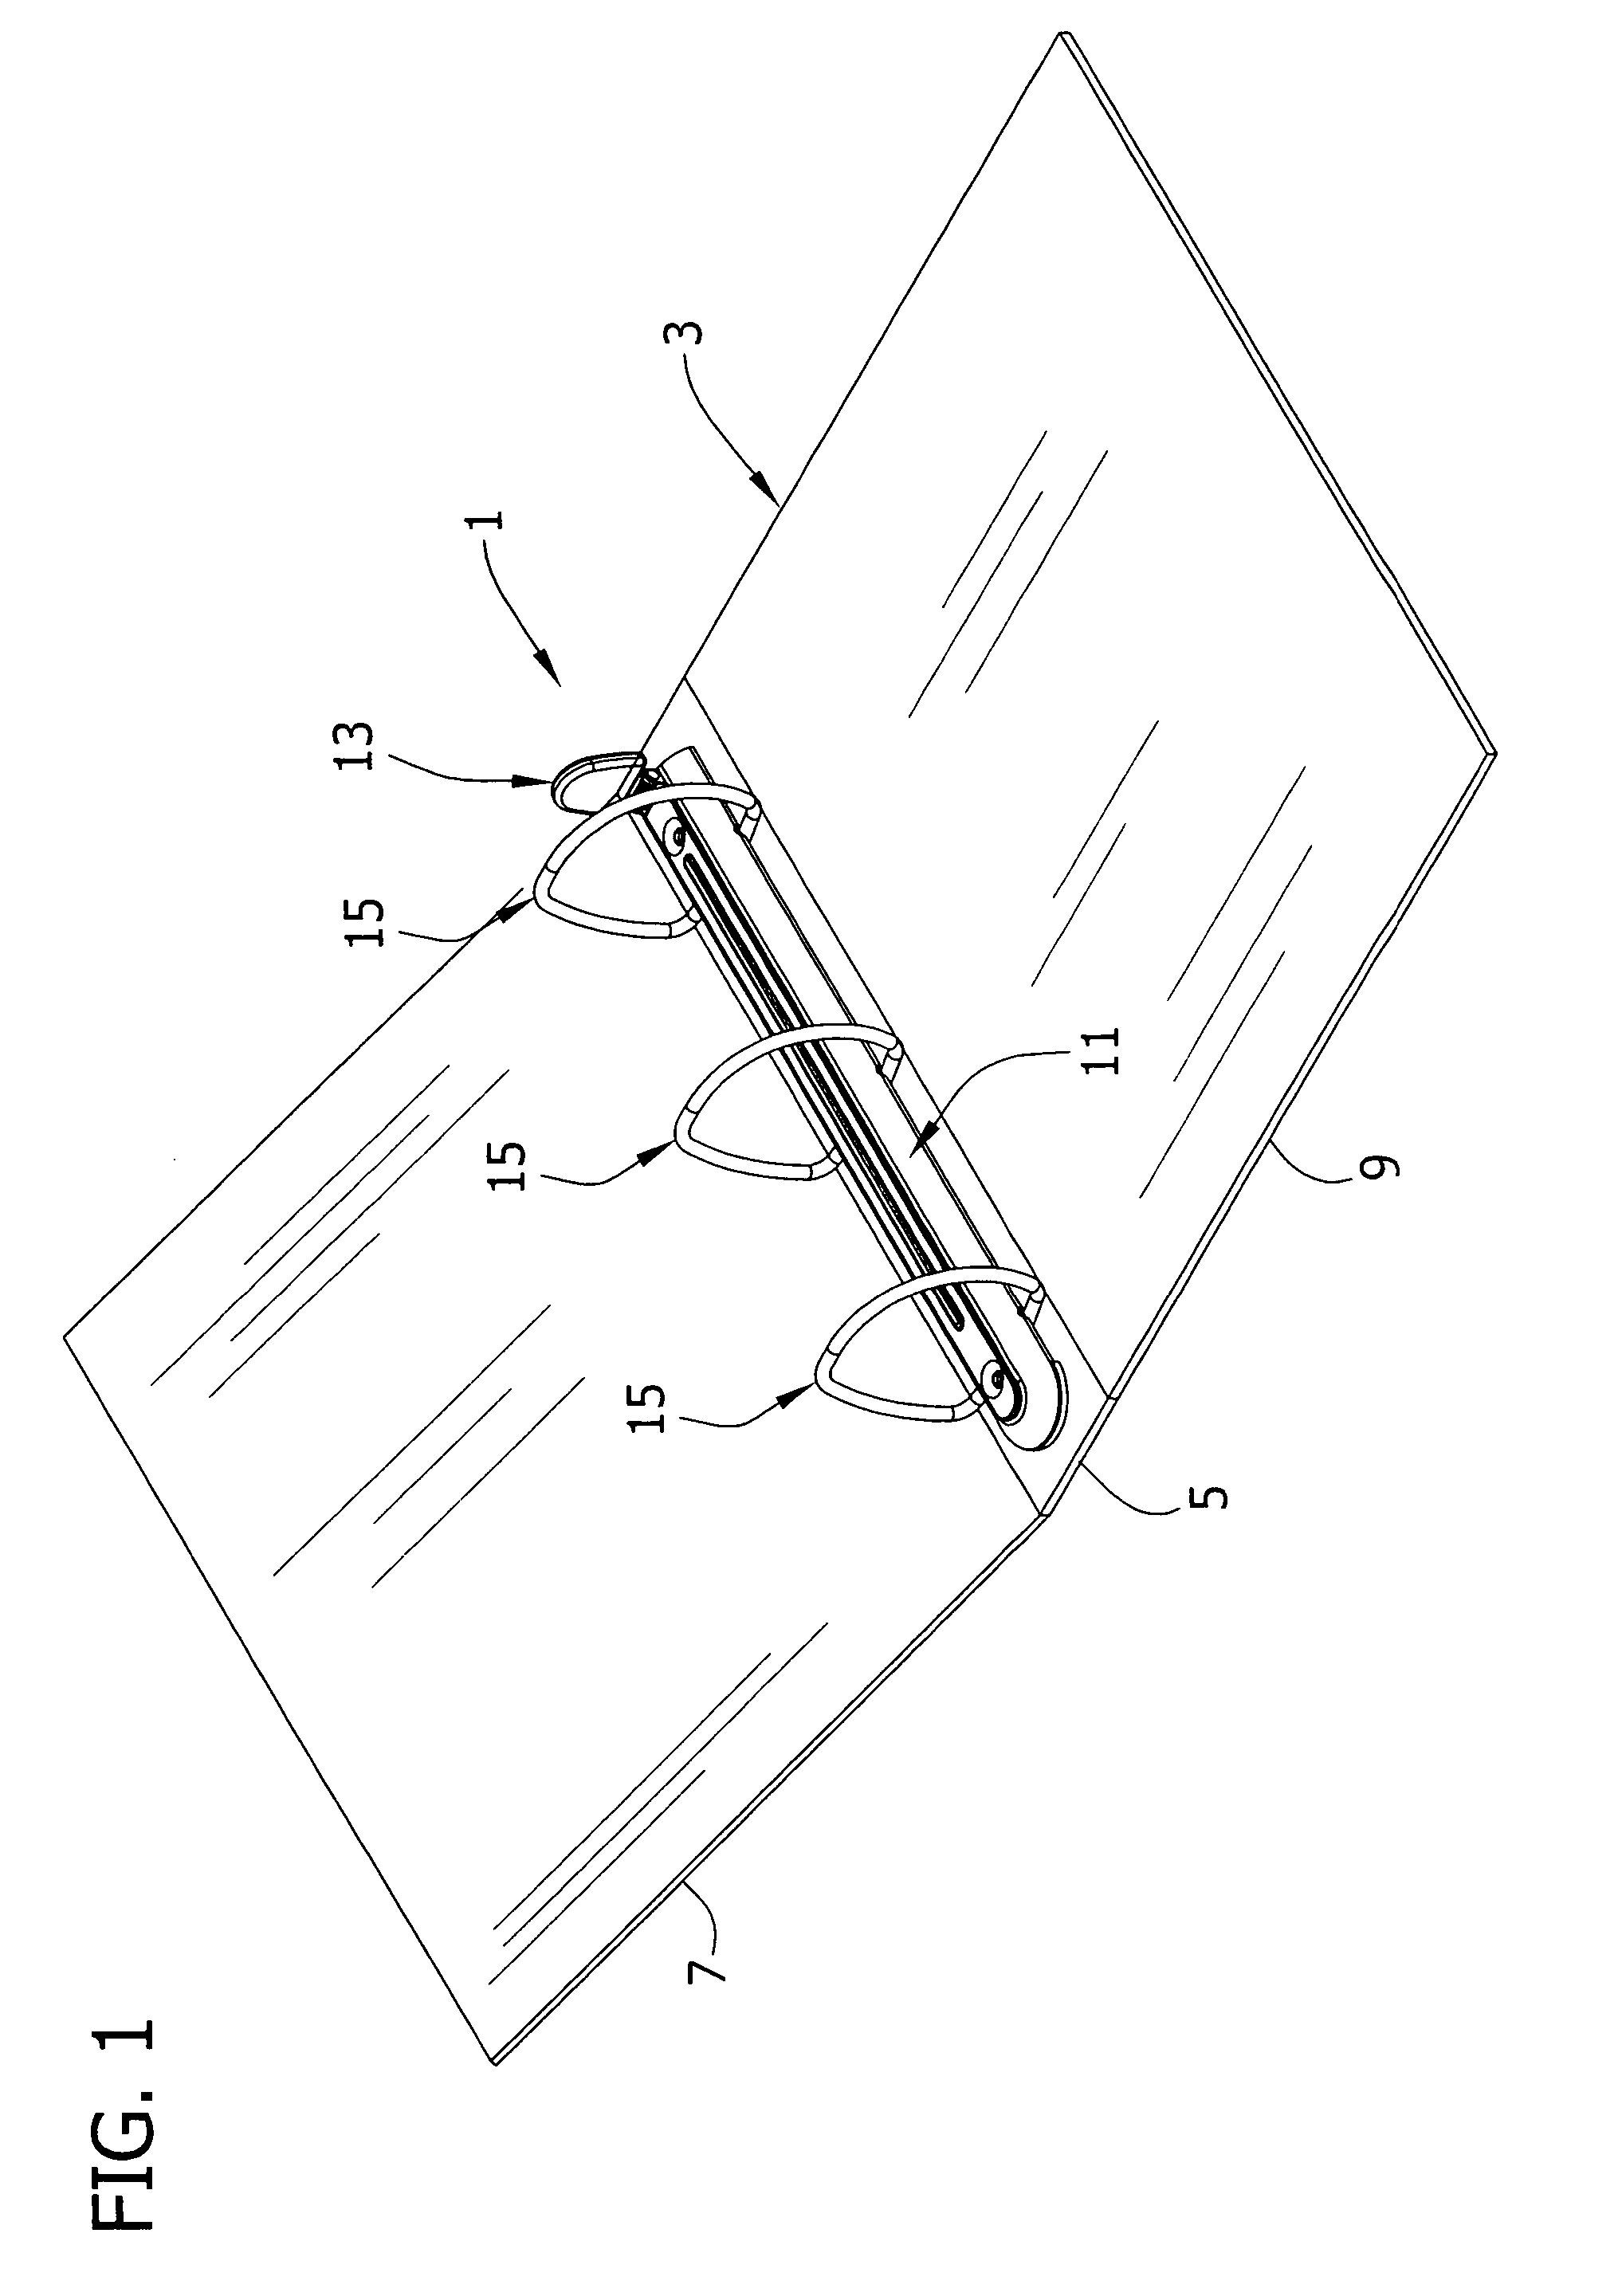 Travel bar for use with a ring mechanism